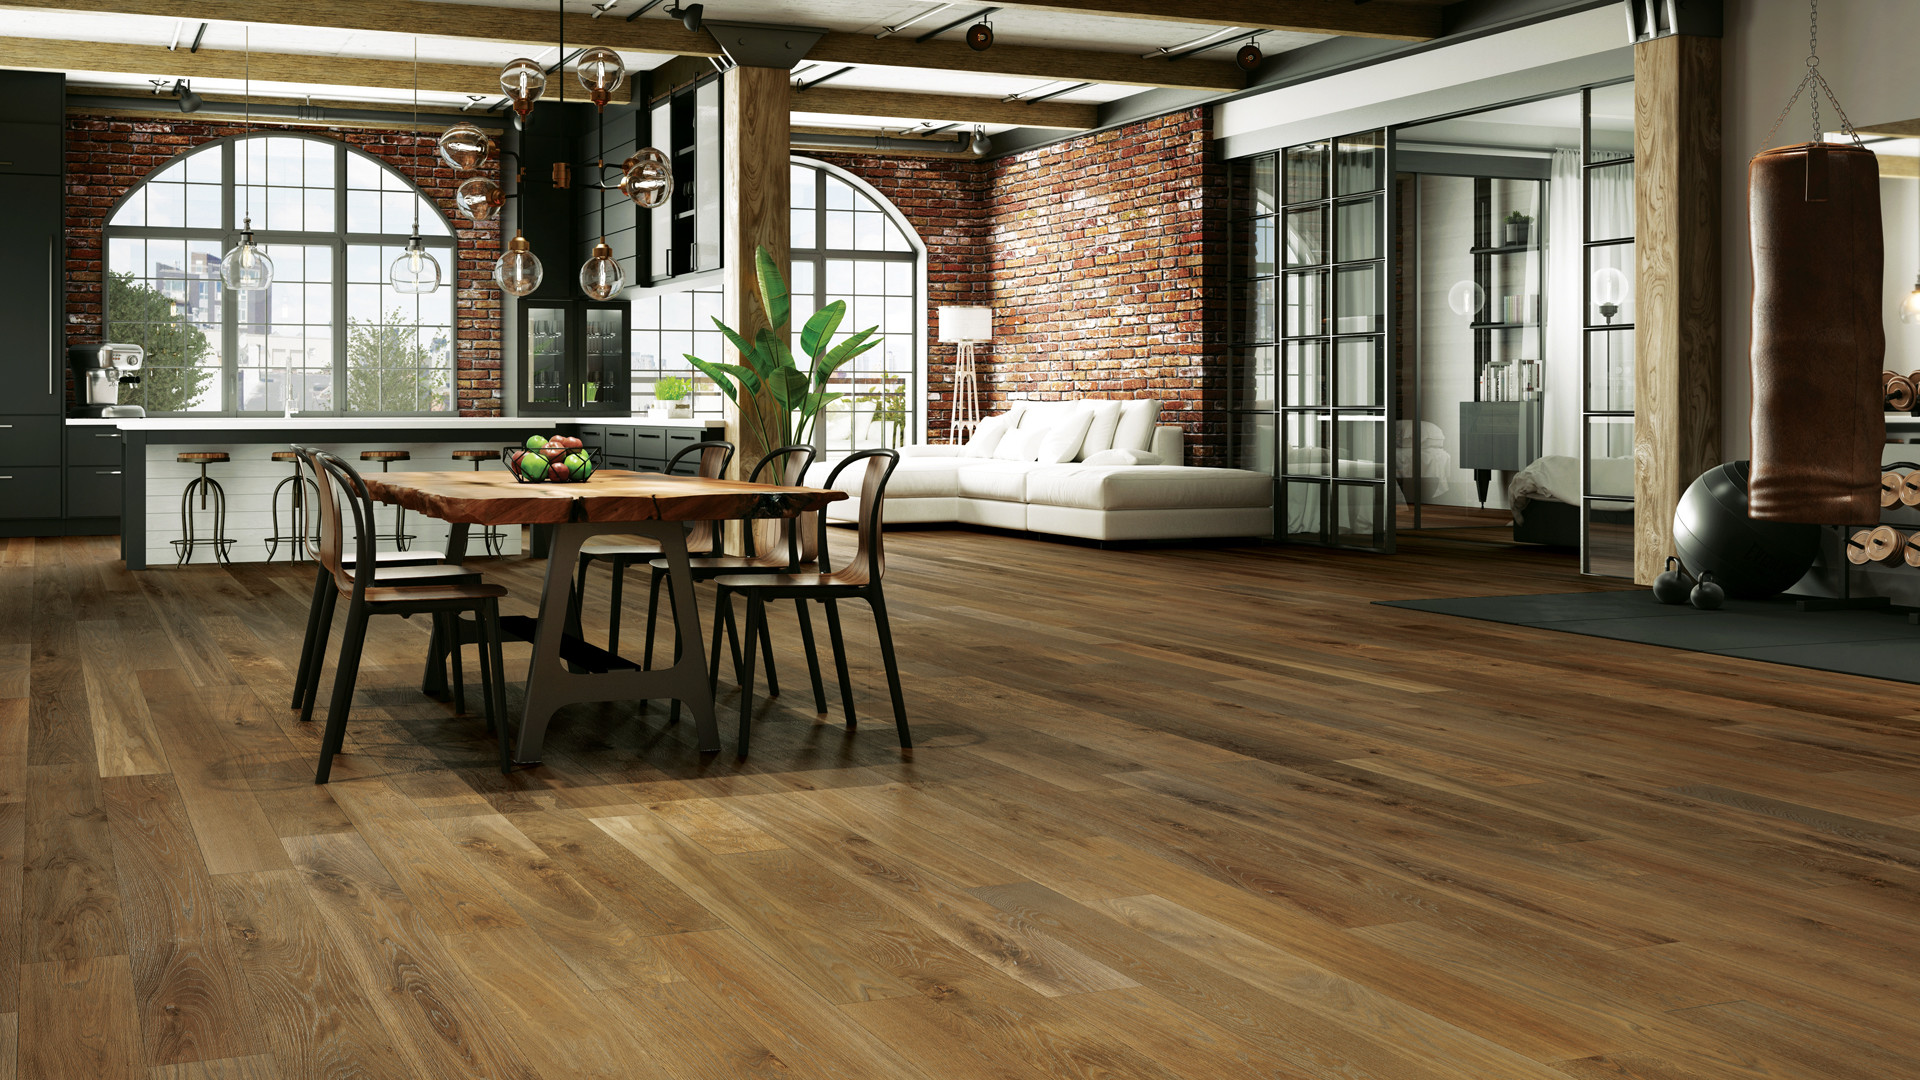 hardwood flooring on concrete floor of 4 latest hardwood flooring trends of 2018 lauzon flooring intended for combined with a wire brushed texture and an ultra matte sheen these new 7a½ wide white oak hardwood floors will definitely add character to your home